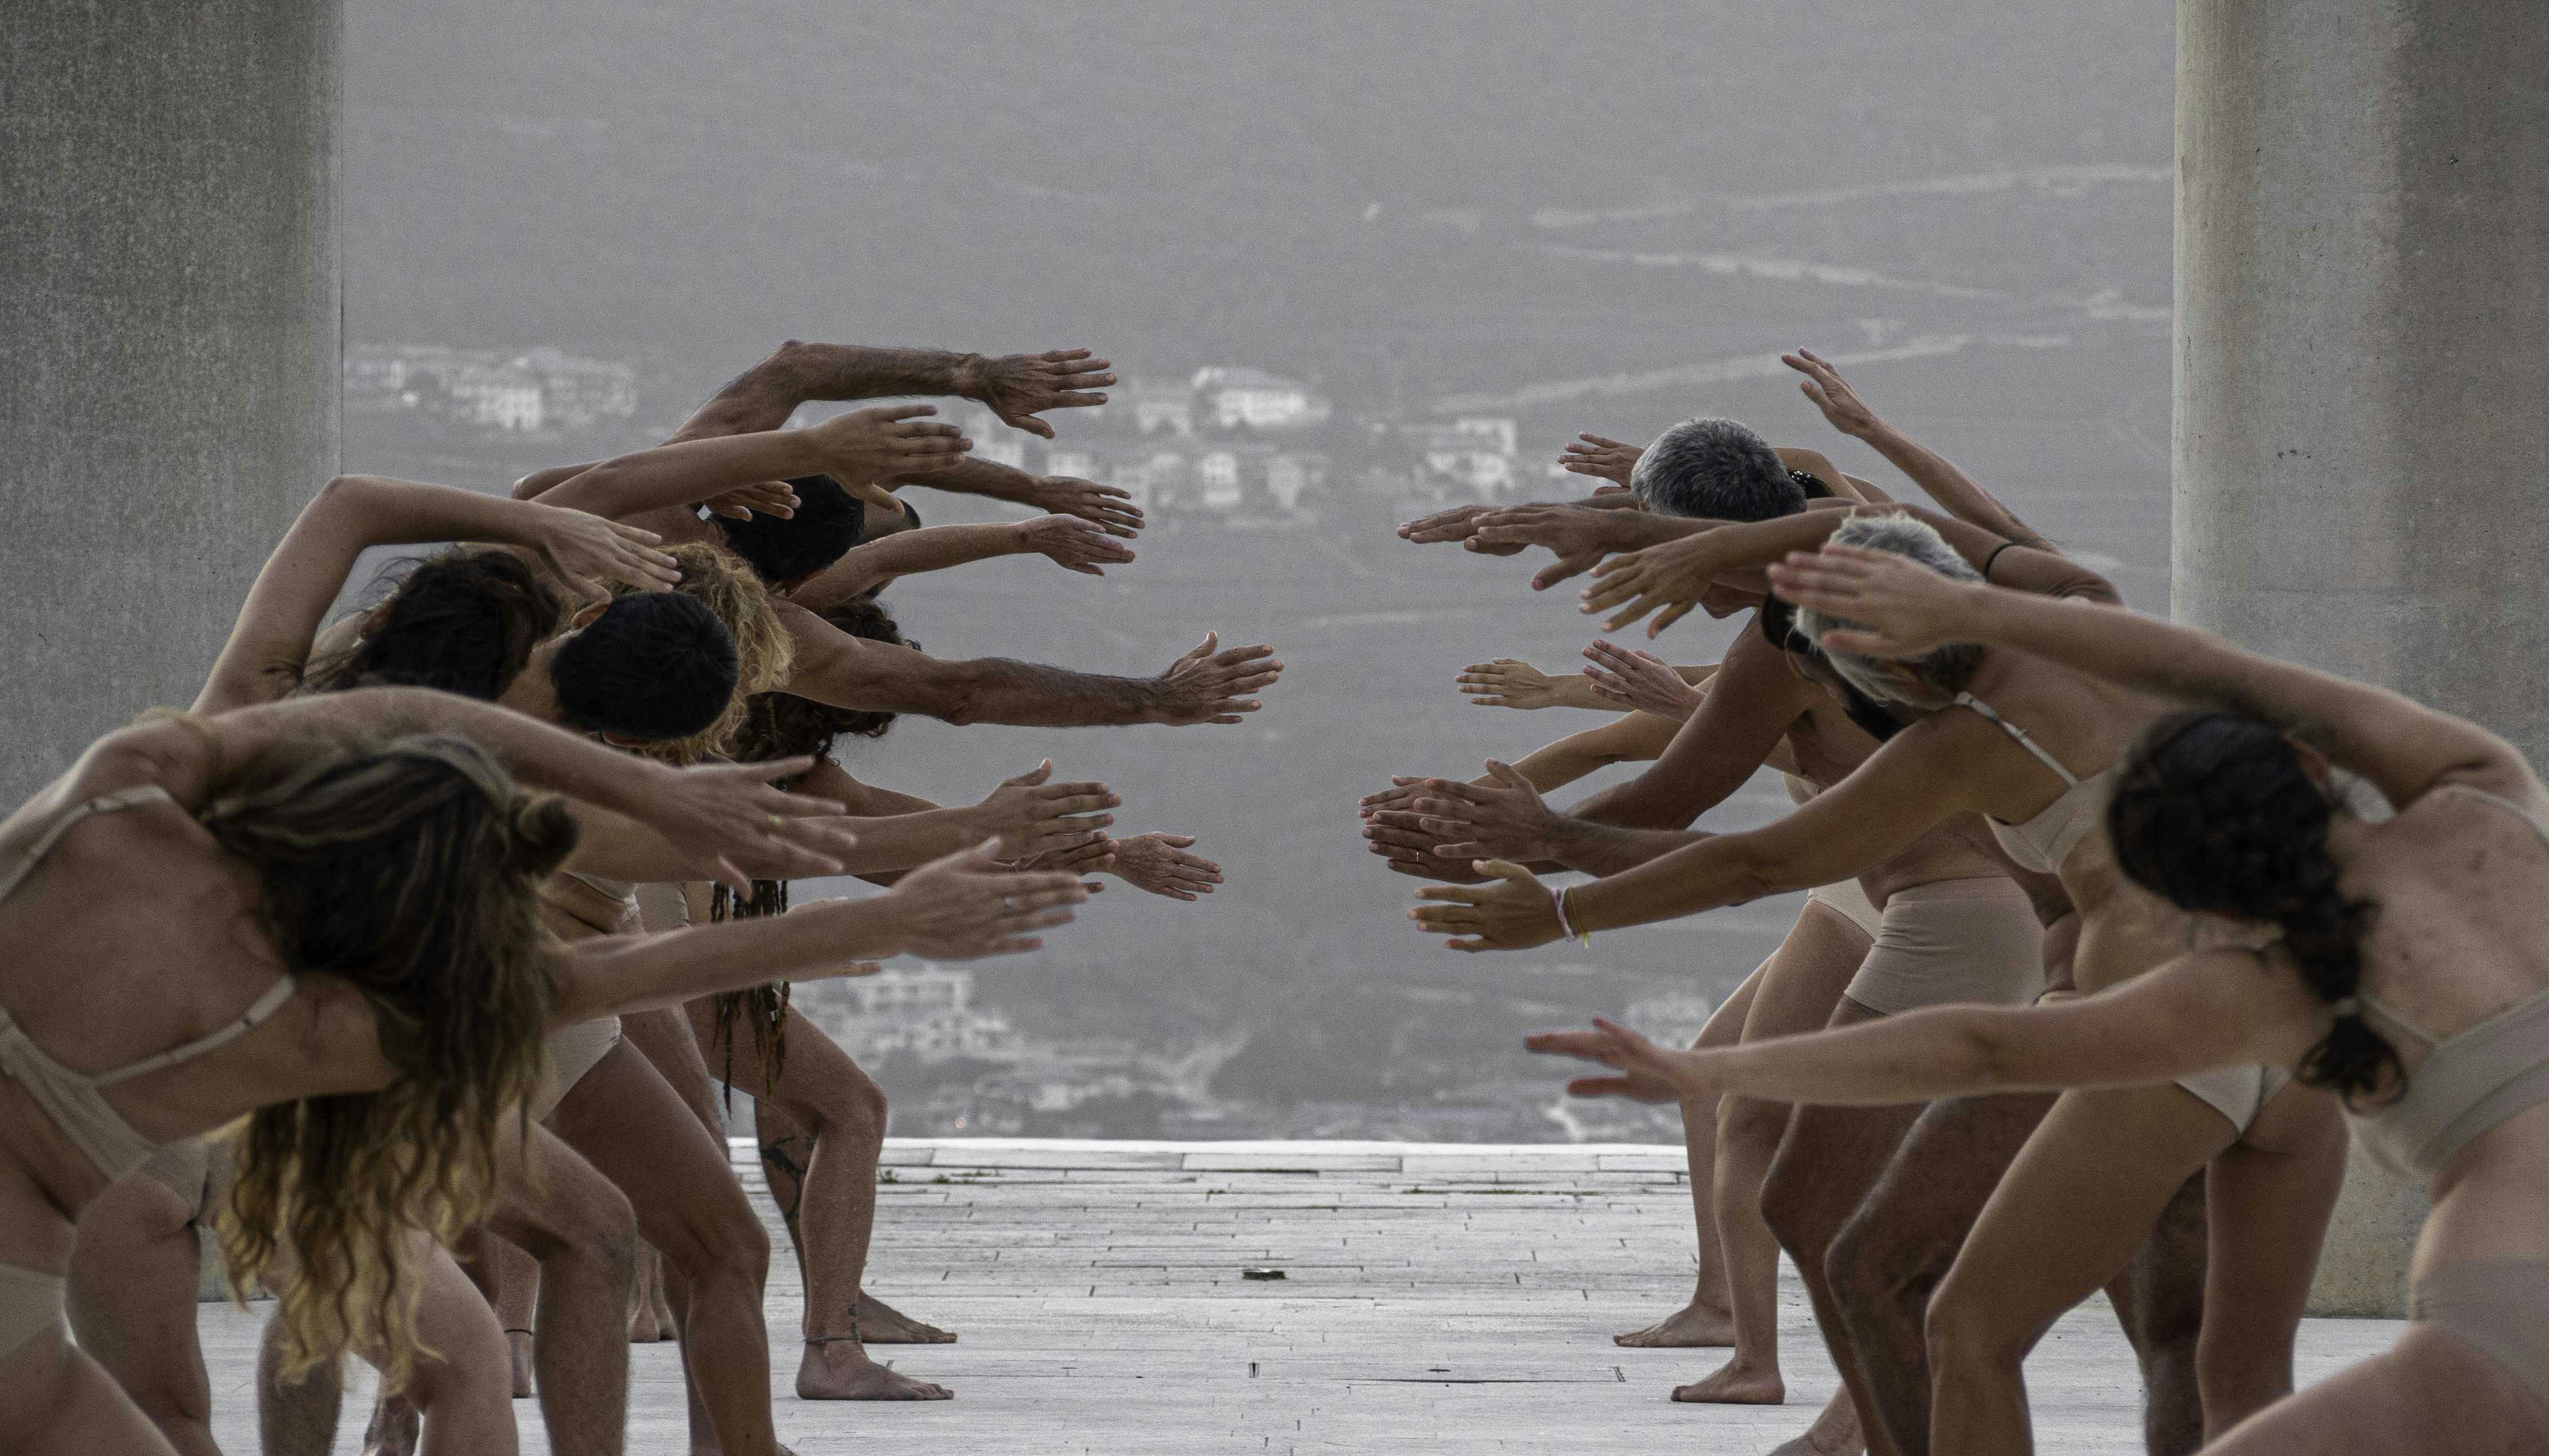 Two parallel rows of human bodies, shot frontally. The performers, wearing only flesh-colored underwear, stretch their arms and torso toward the center, trying to push themselves toward the opposite row.